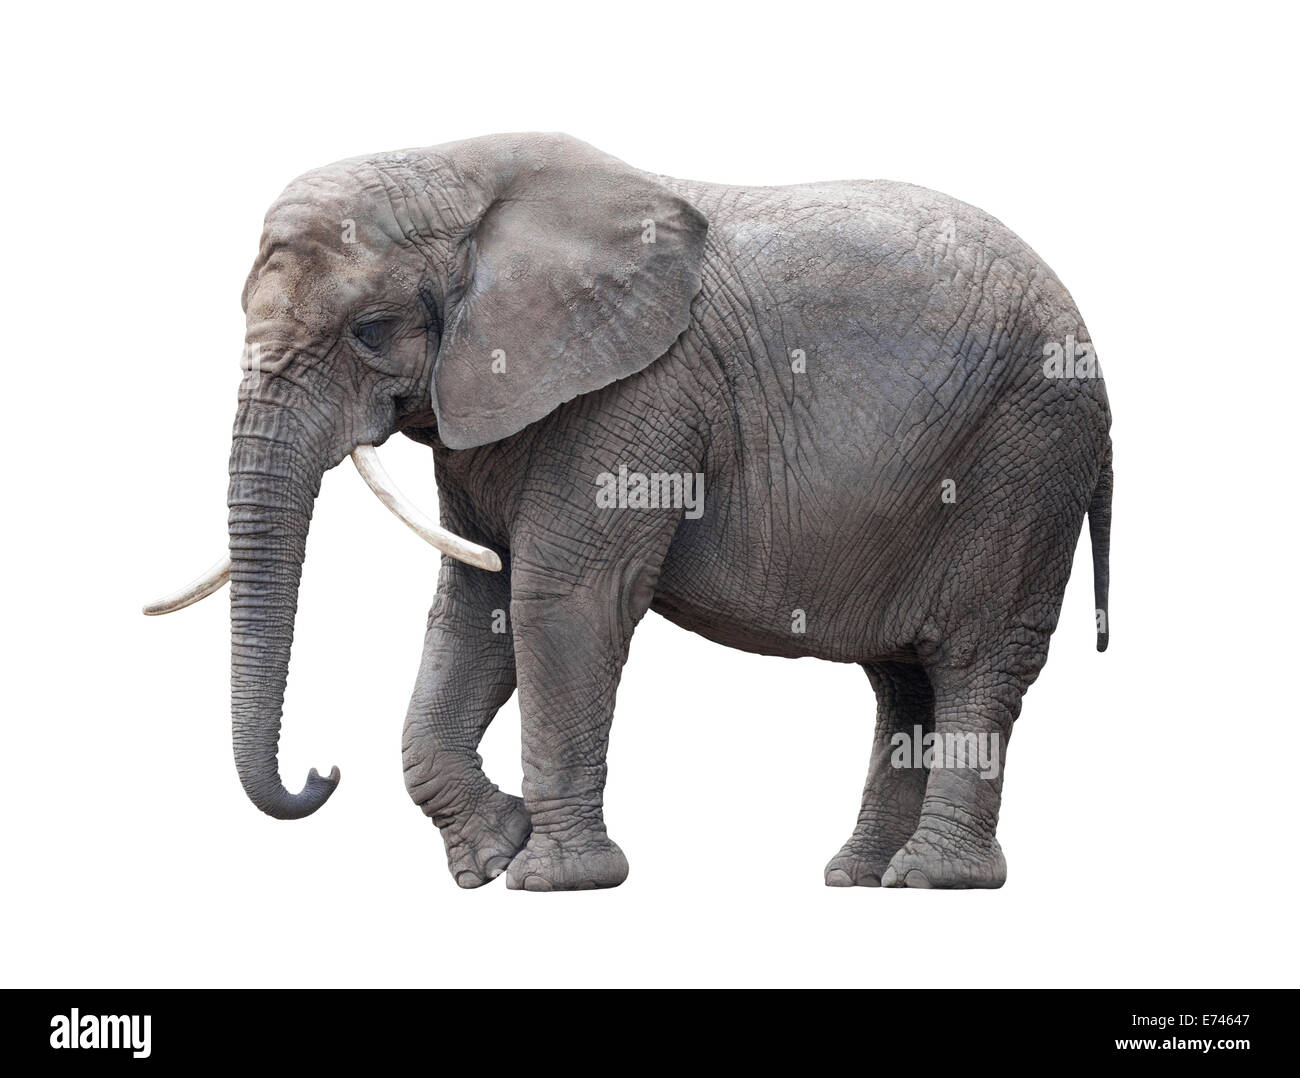 African elephant isolated on white with clipping path Banque D'Images